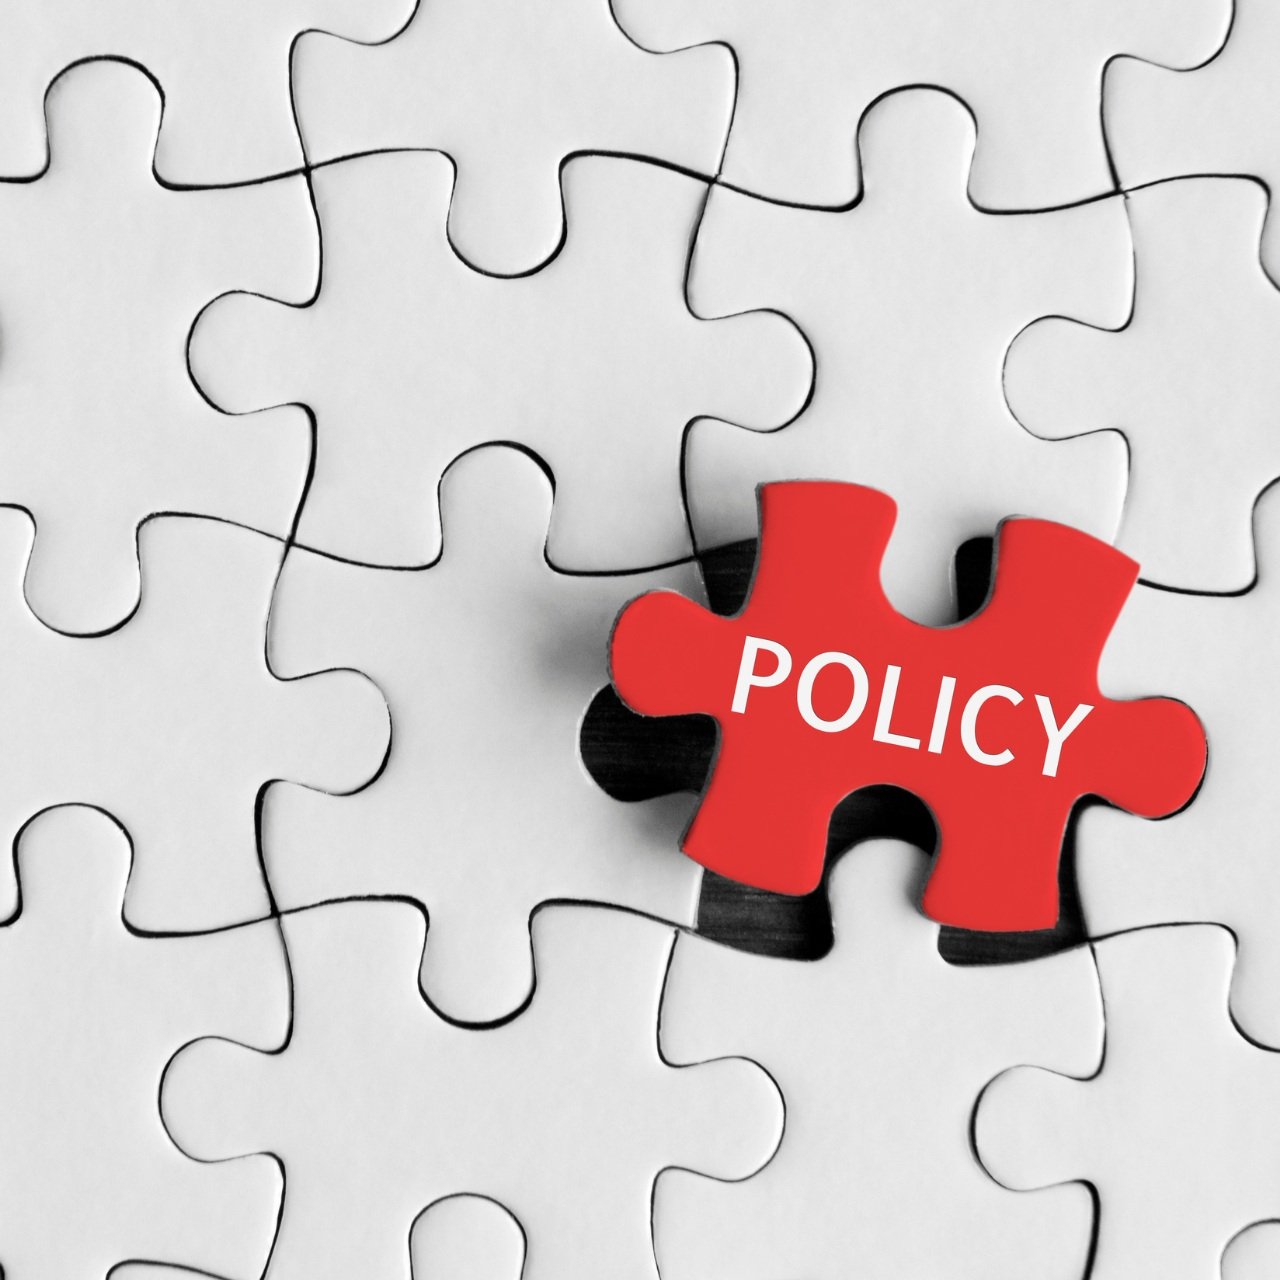 How to build a relocation policy